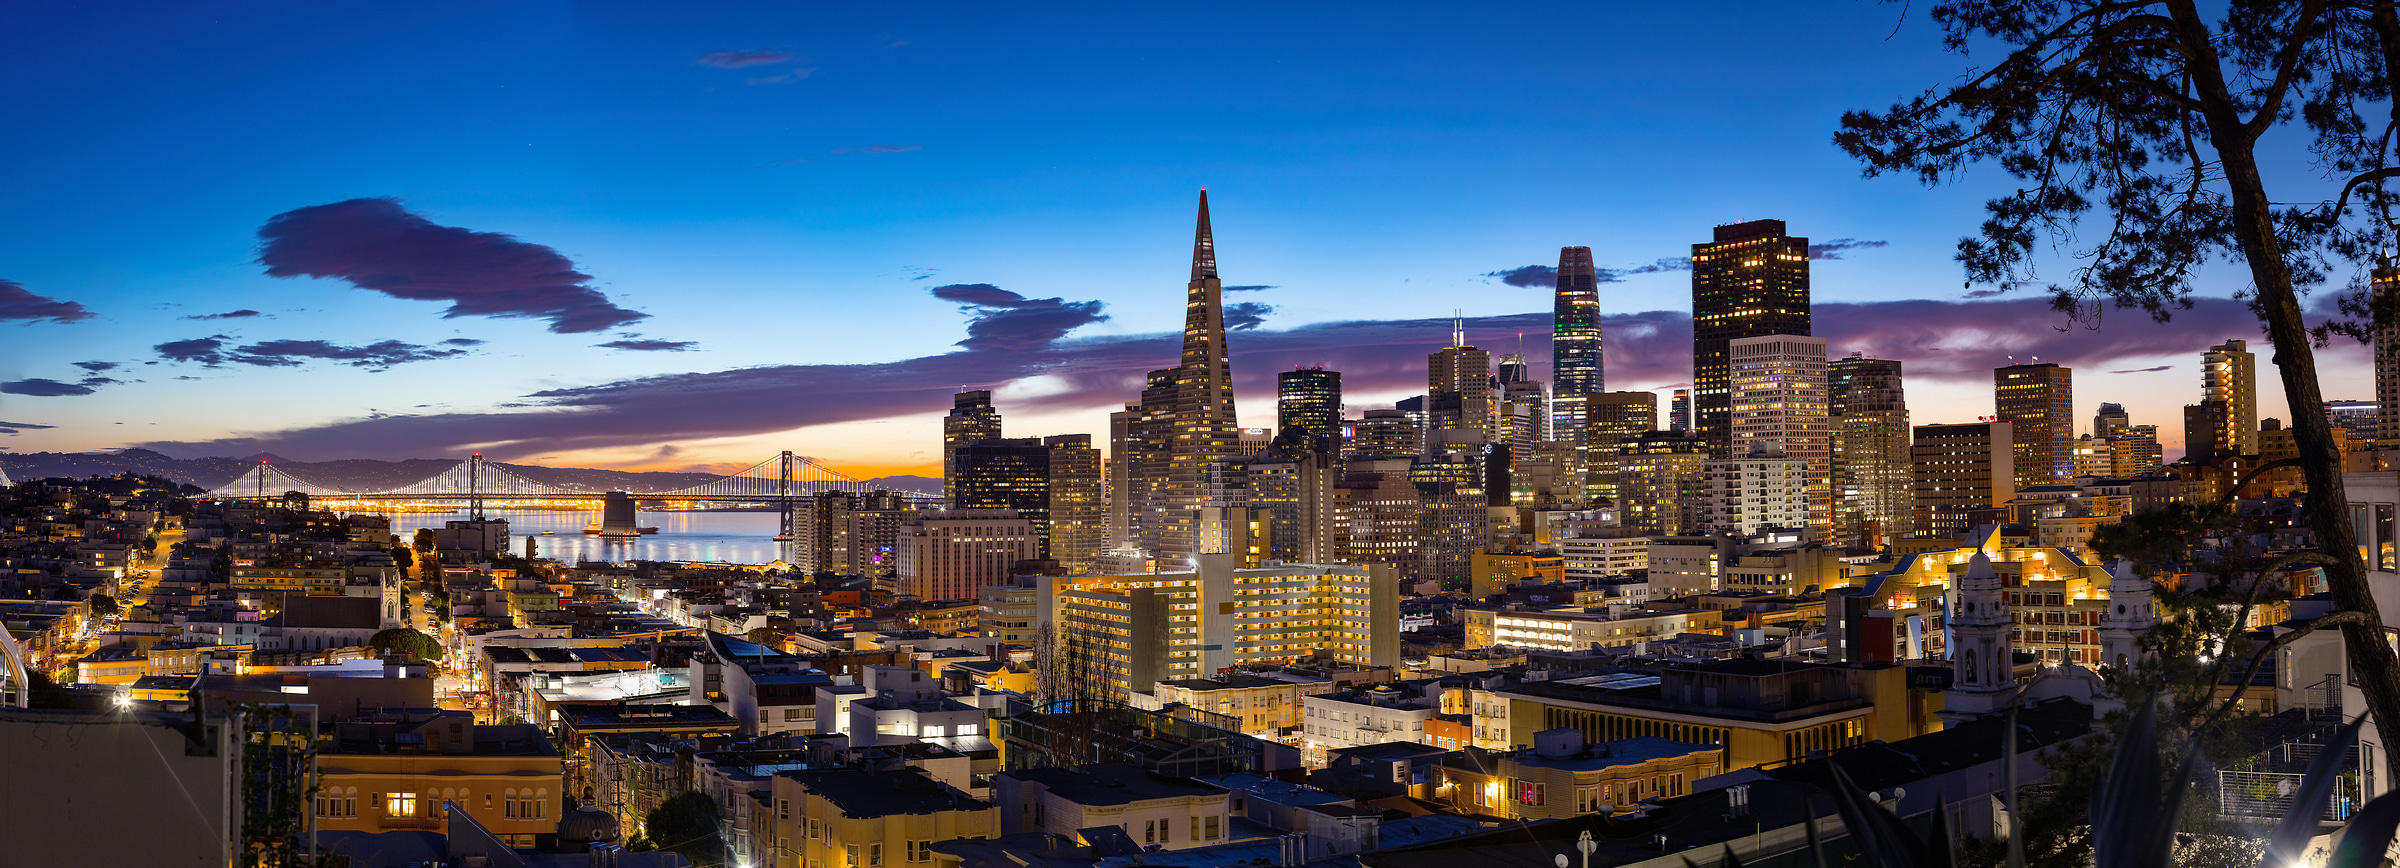 398 megapixels! A very high resolution, large-format VAST photo print of the San Francisco skyline at sunrise; cityscape skyline photograph created by Nicholas Gonzales in Ina Coolbrith Park, San Francisco, California.